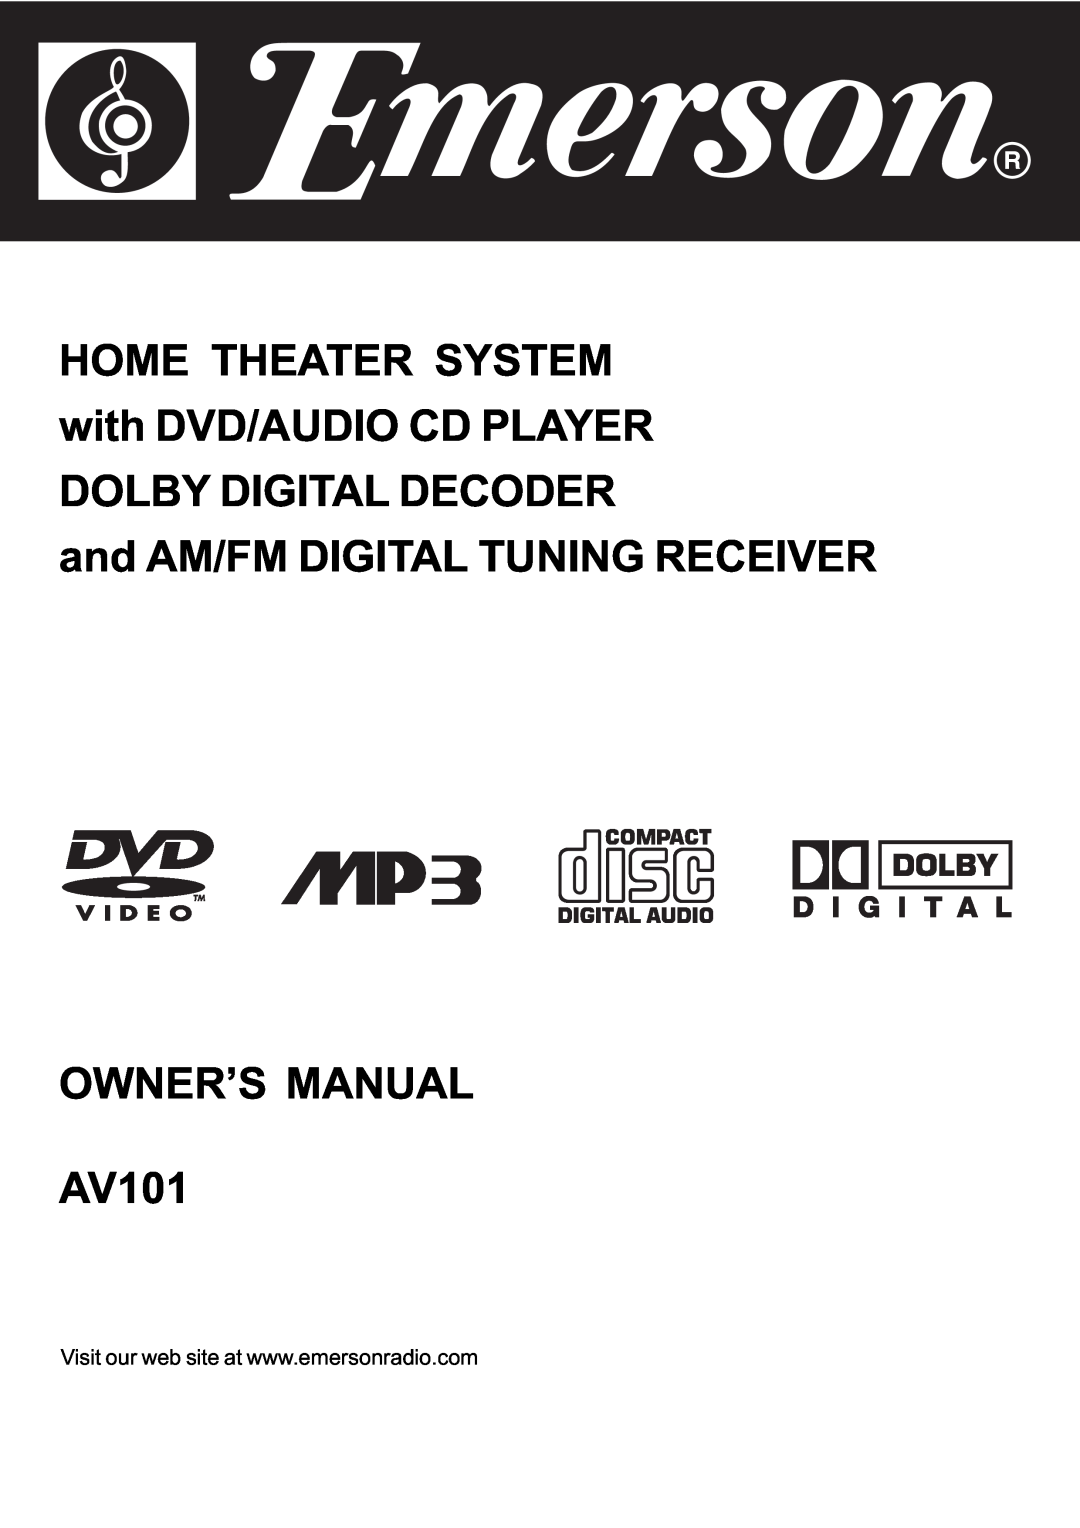 Emerson AV101 setup guide Complete Home Theater System with DVD/CD Player and Digital Tuner, Quick Set Up Guide, 6 /5 